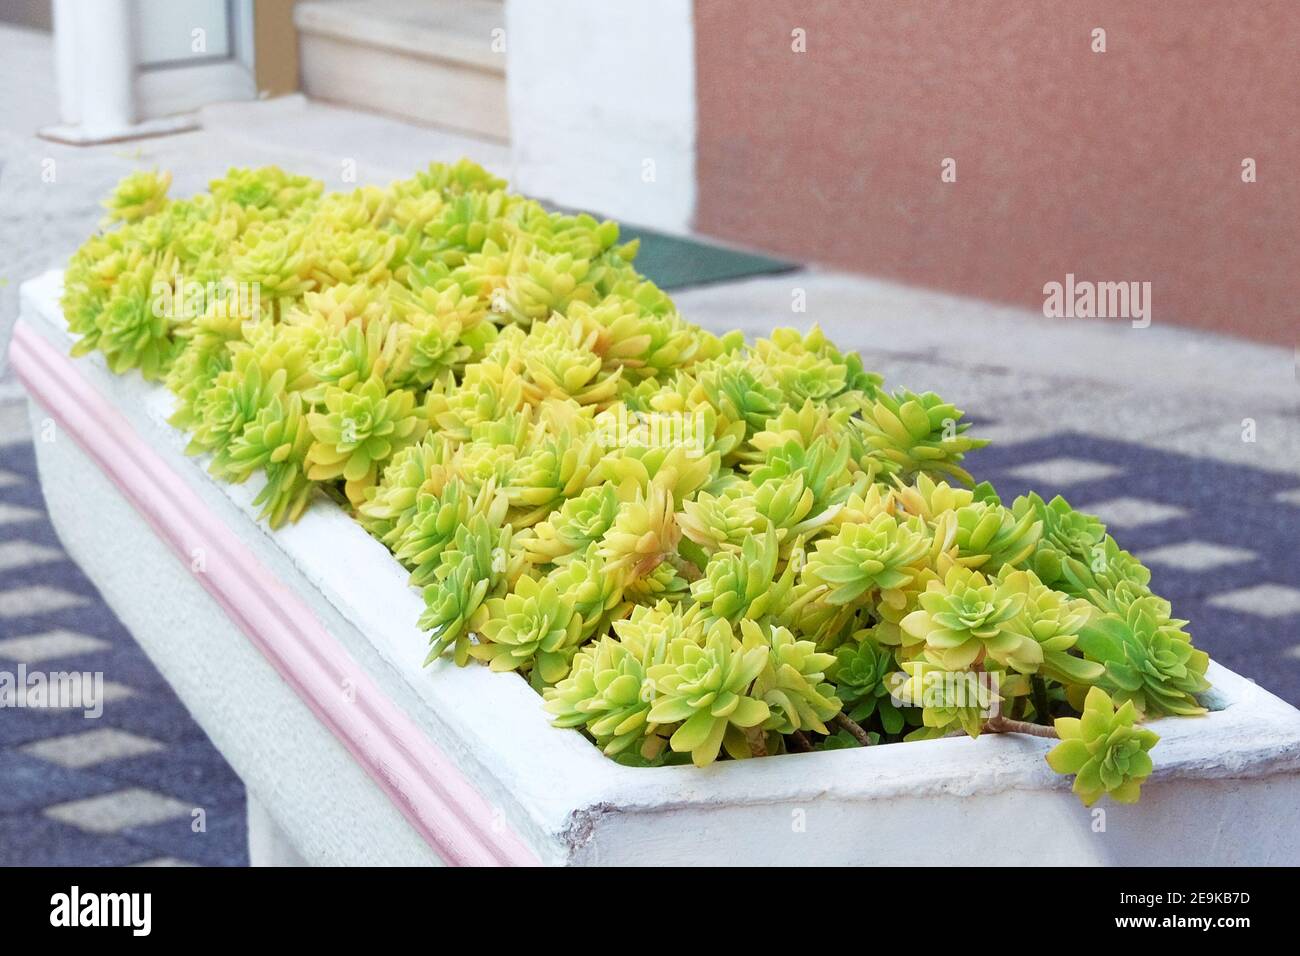 Succulents plants in pot in courtyard. Aeonium plants. Potted plants for house, landscape design. Stock Photo